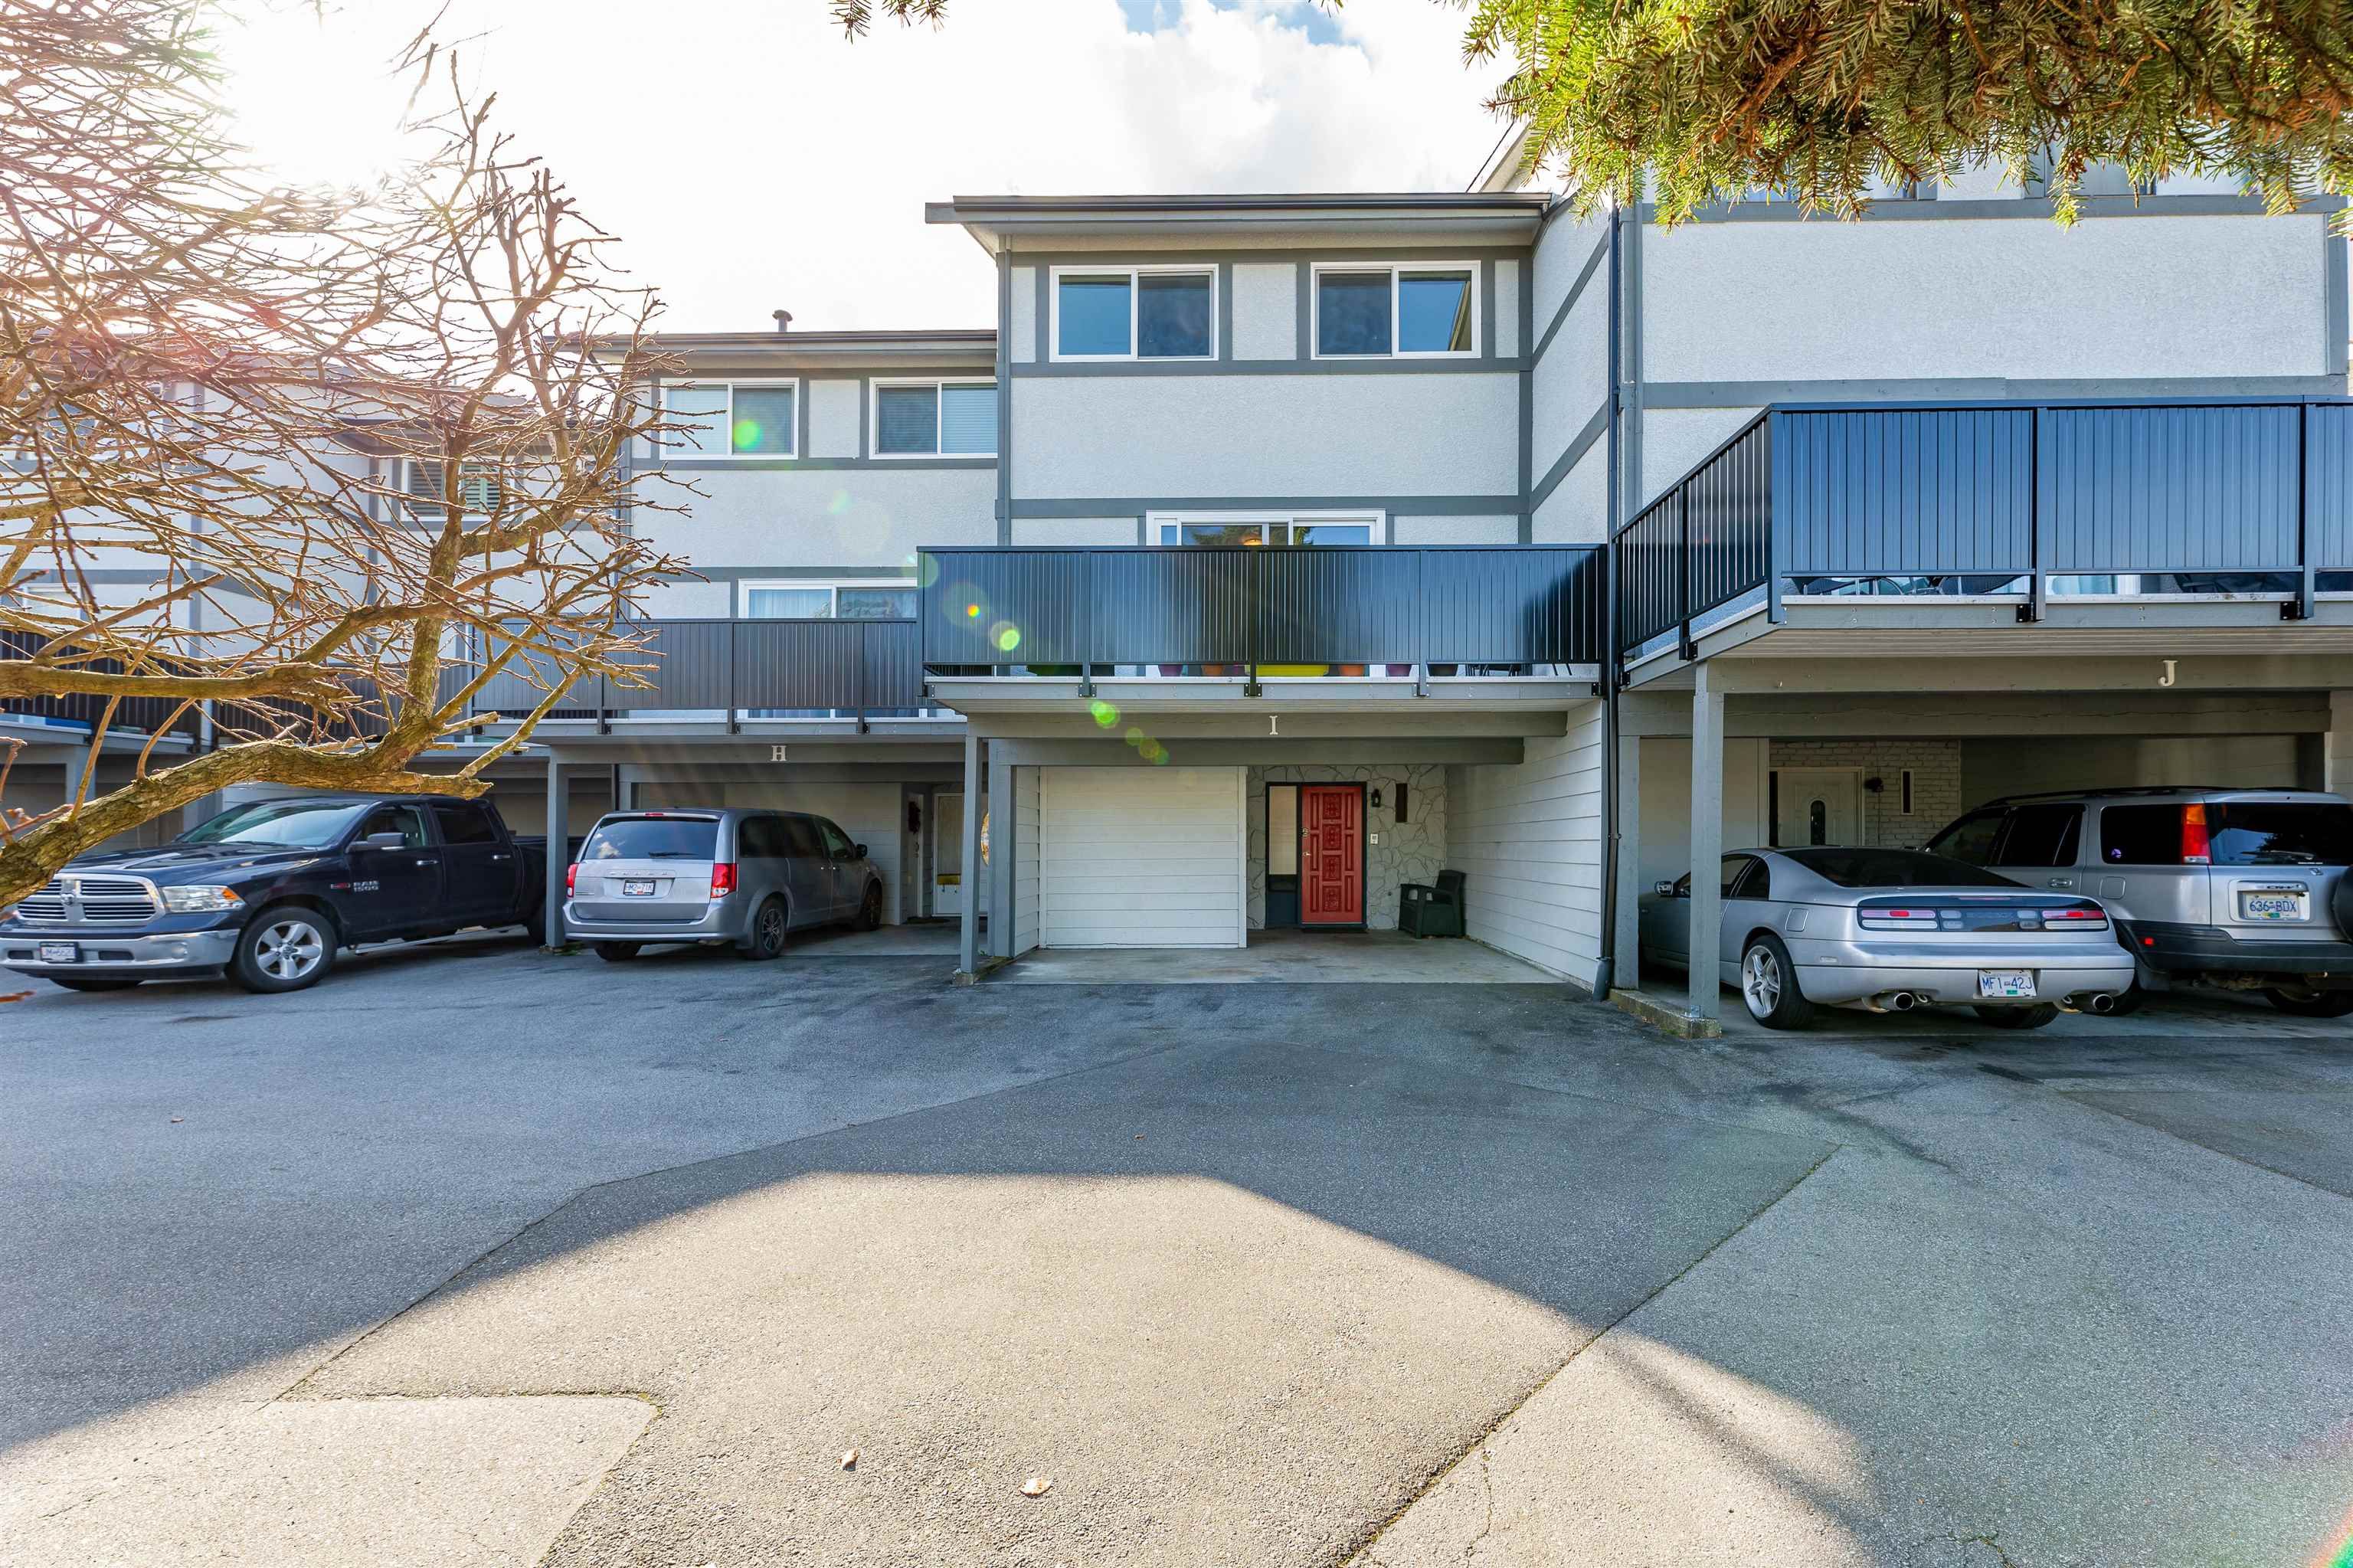 New property listed in Hawthorne, Ladner